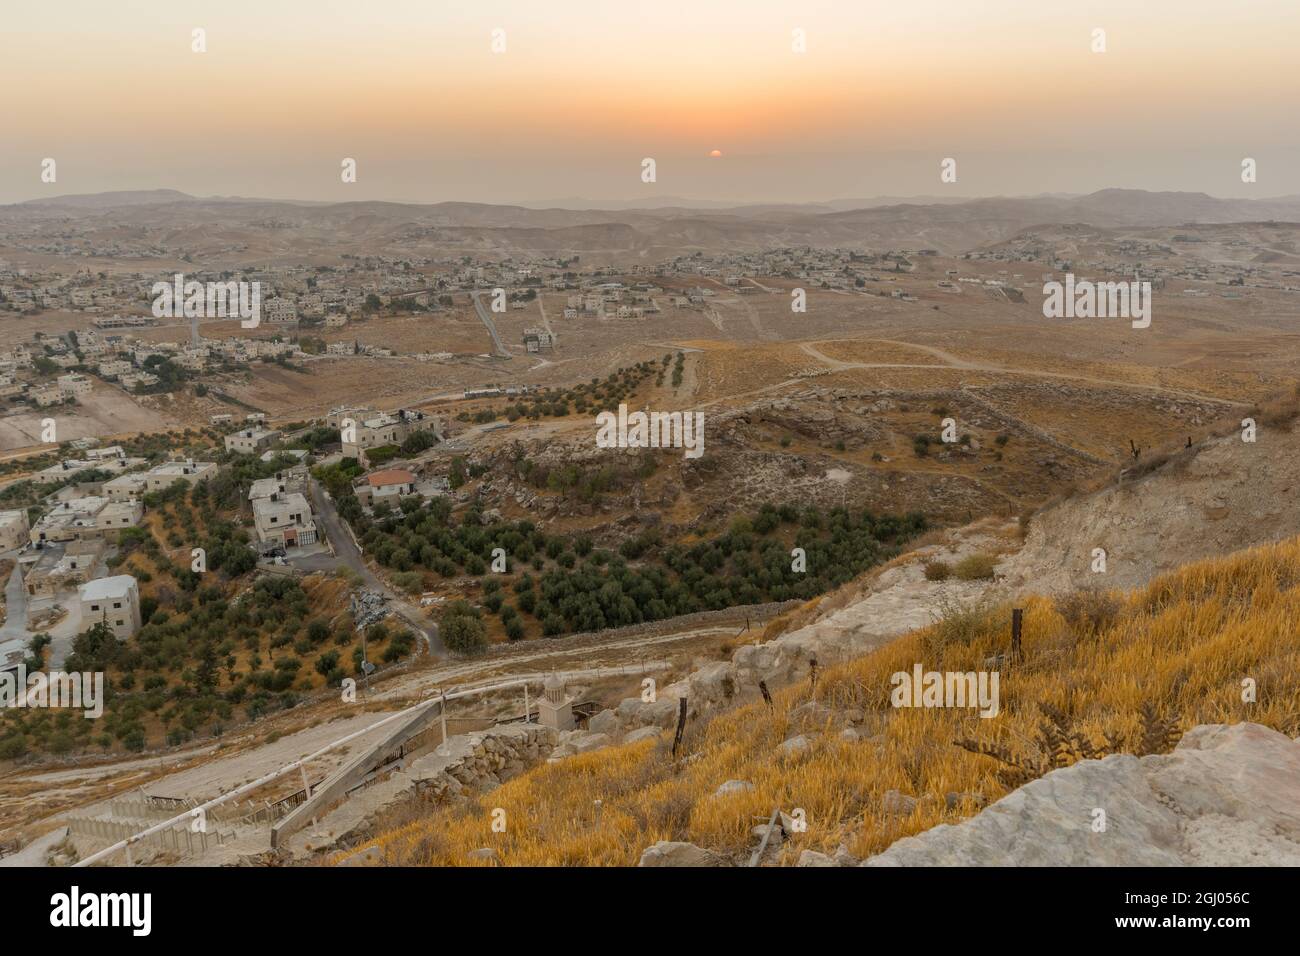 Sunrise view towards the Judaean desert and the Dead Sea, with a herd of sheep and Palestinian villages. From Herodium, the West Bank, South of Jerusa Stock Photo